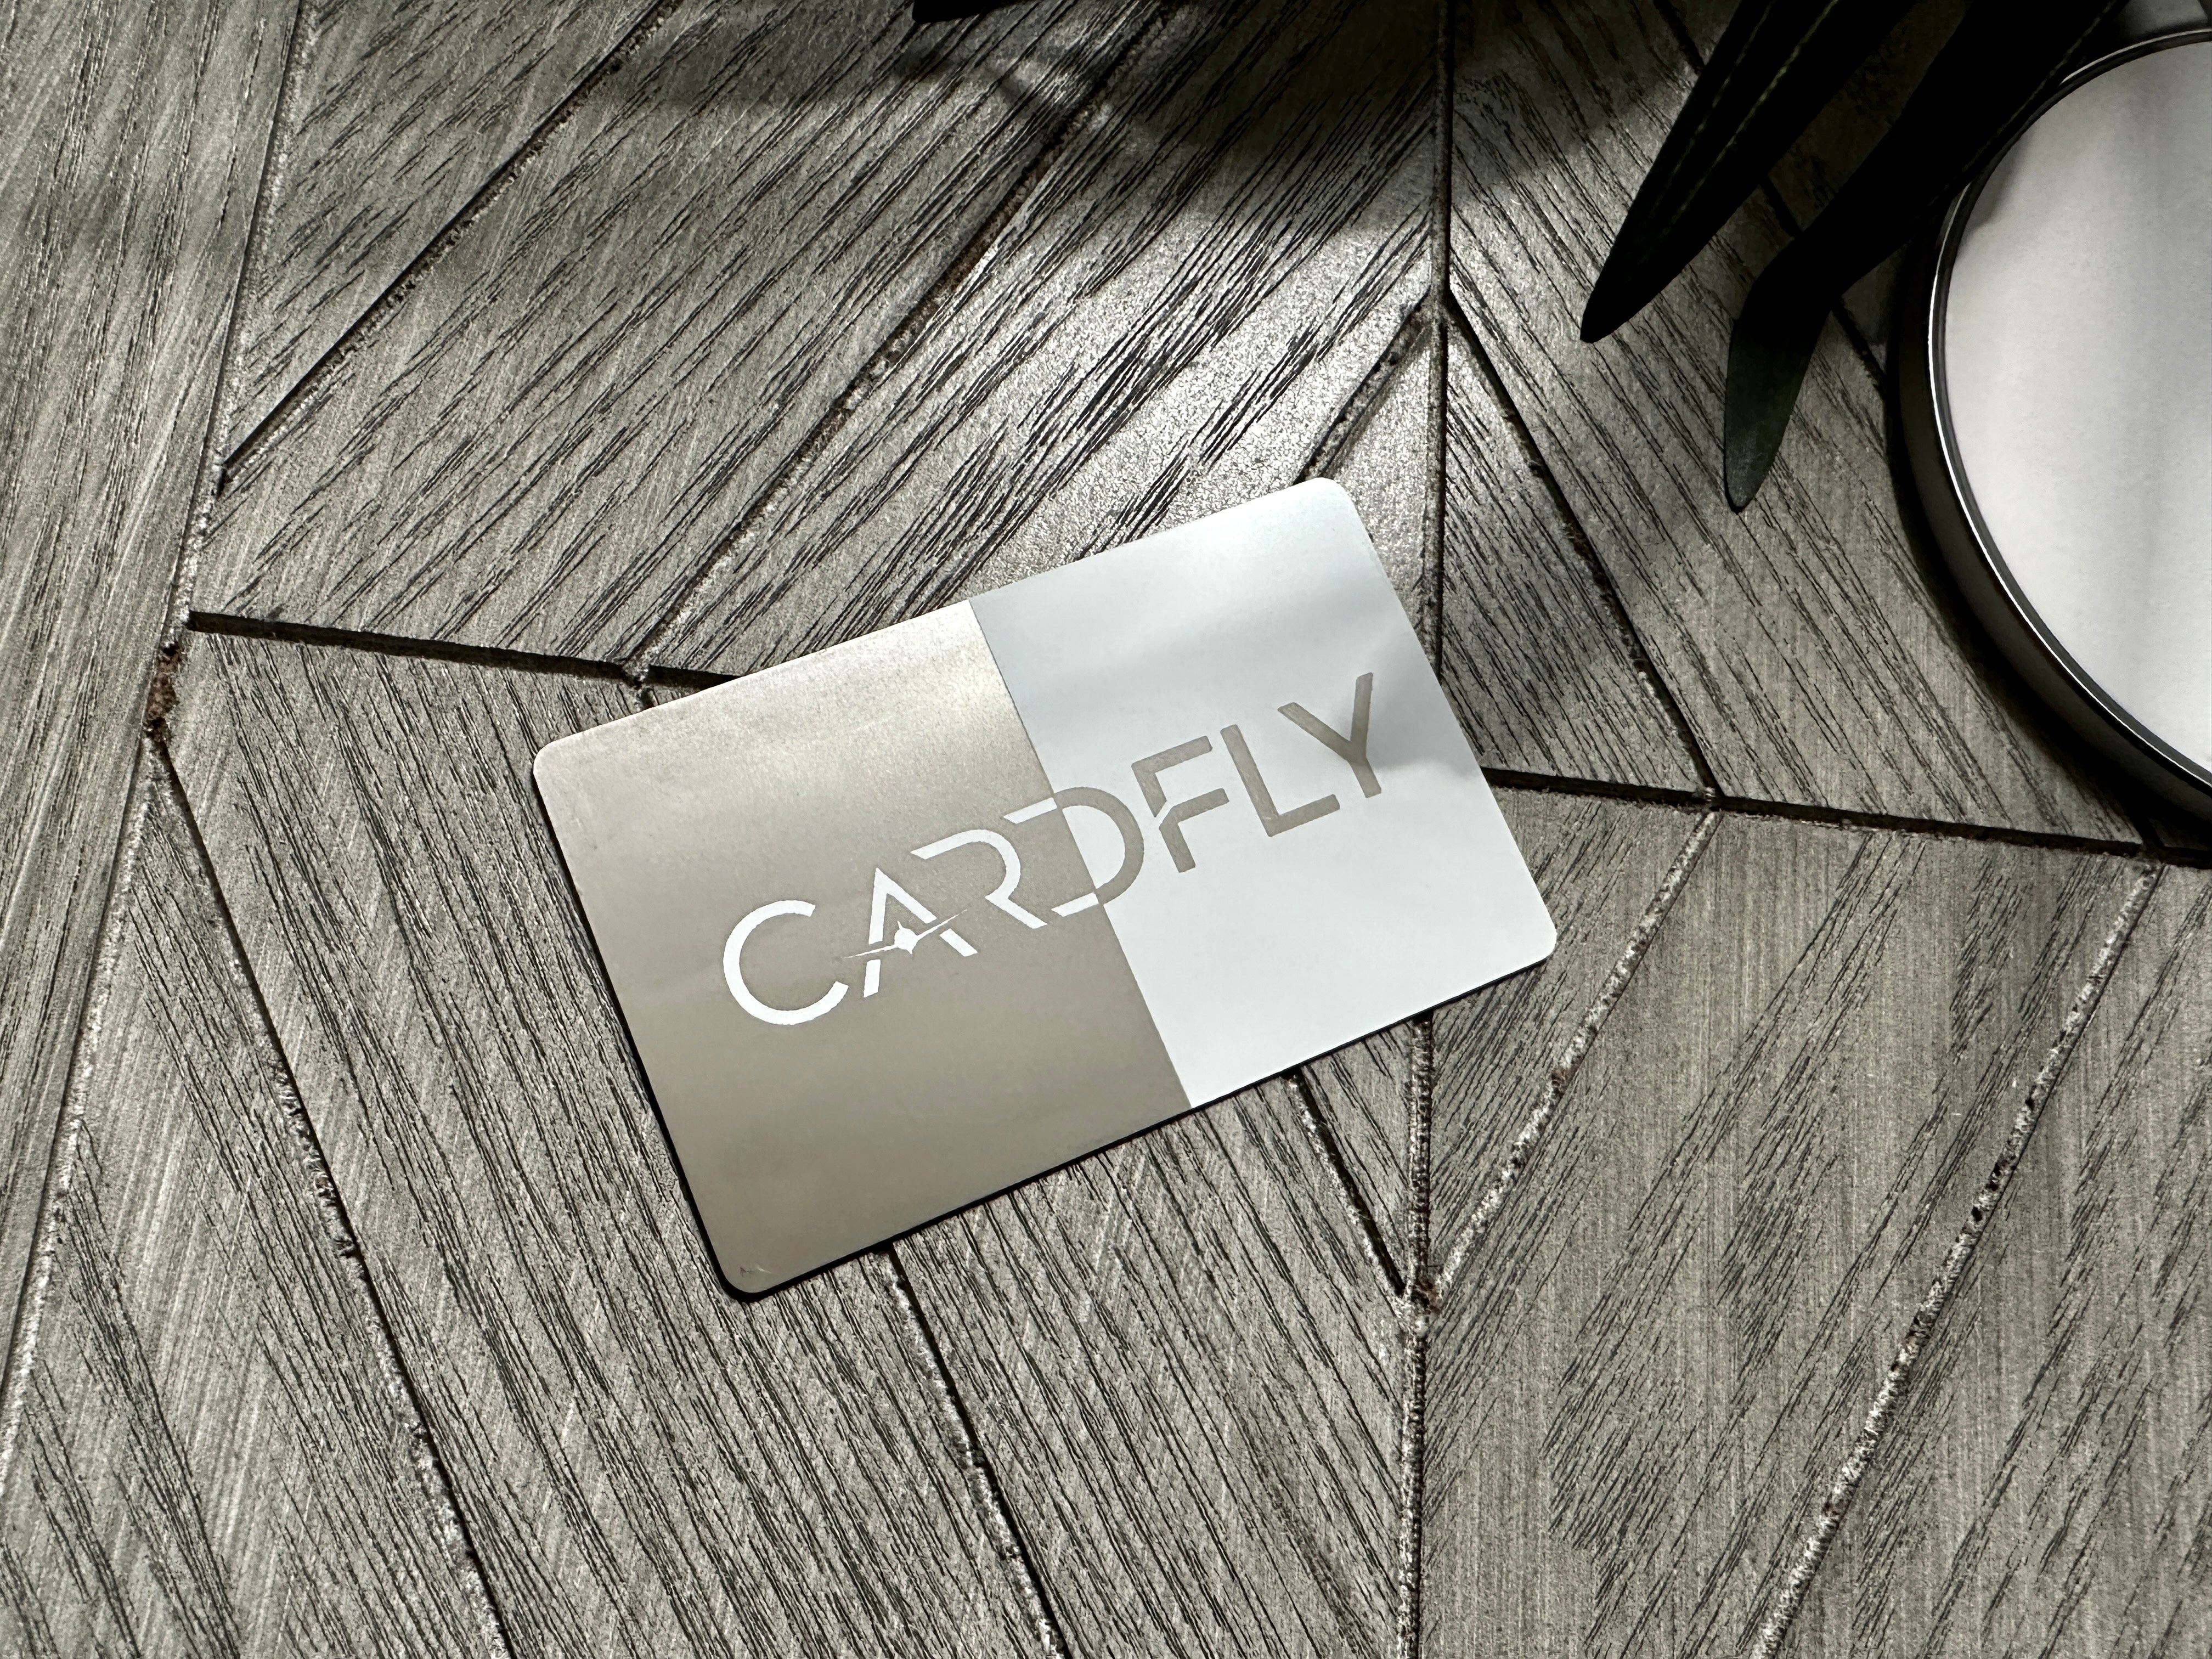 Pearl White Anodized Steel - Tap Business Card